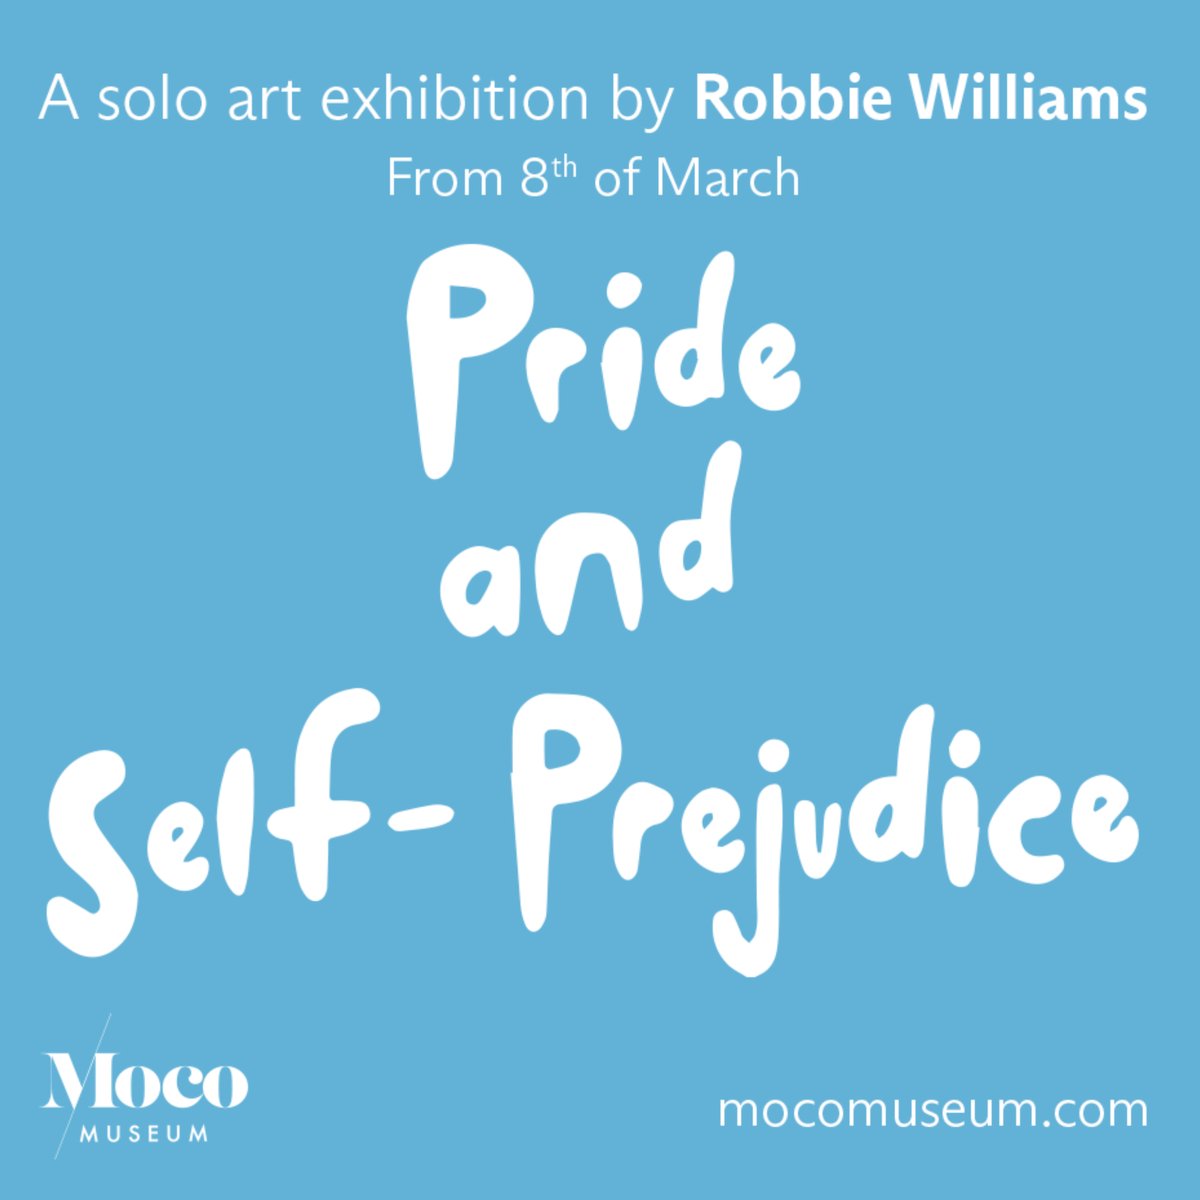 Robbie Williams announces his first solo art exhibition titled ‘Pride and Self-Prejudice’. Featuring pieces the artist has crafted over the years, the exhibition will open on March 8th at @moco_museum in Amsterdam. More information >> robbiewilliams.lnk.to/RWxMOCO